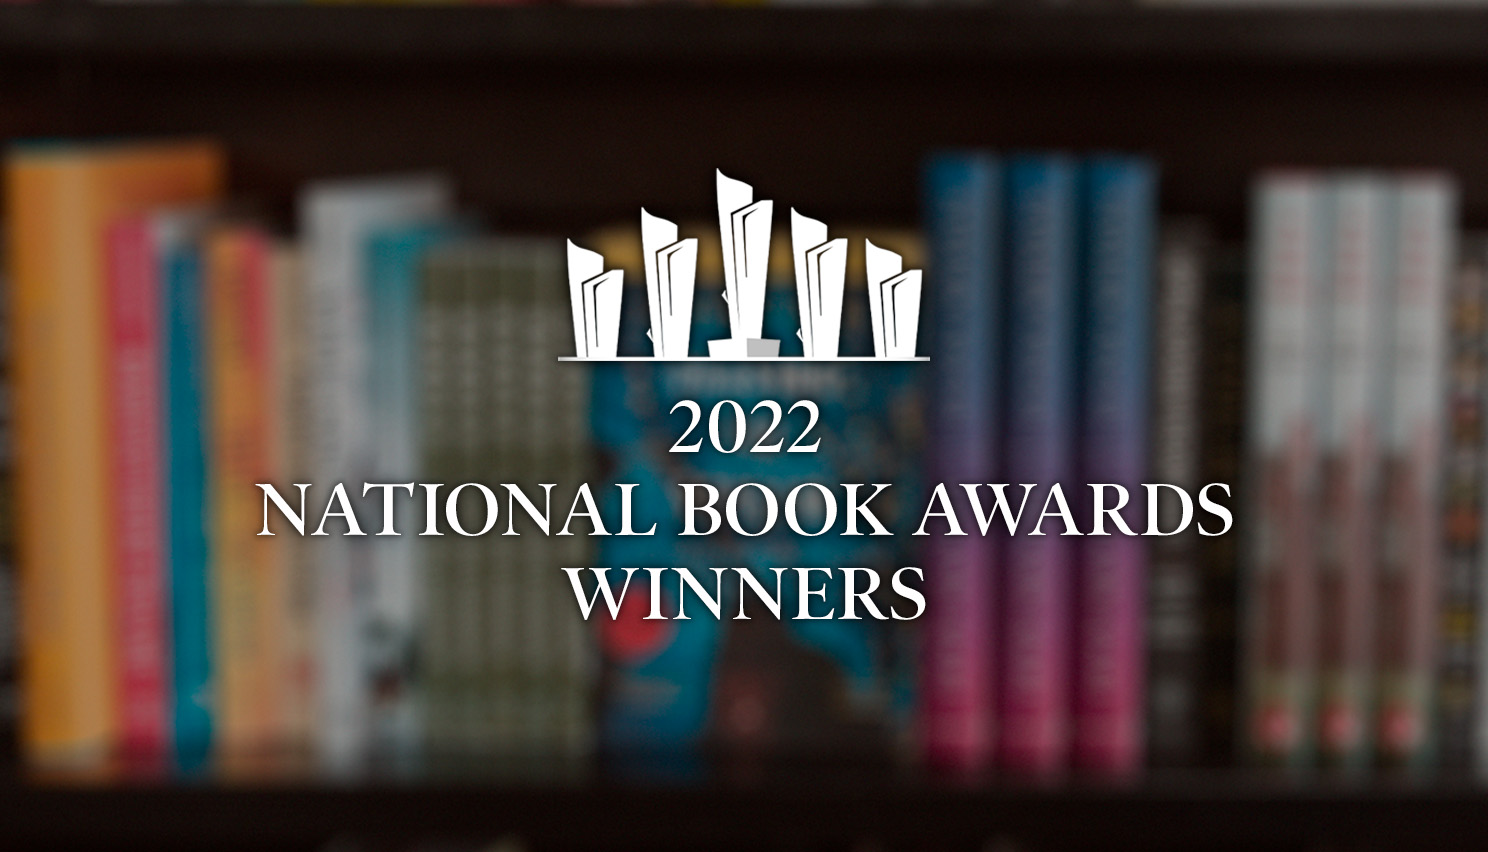 Congratulations to the Winners of the 2022 National Book Awards B&N Reads